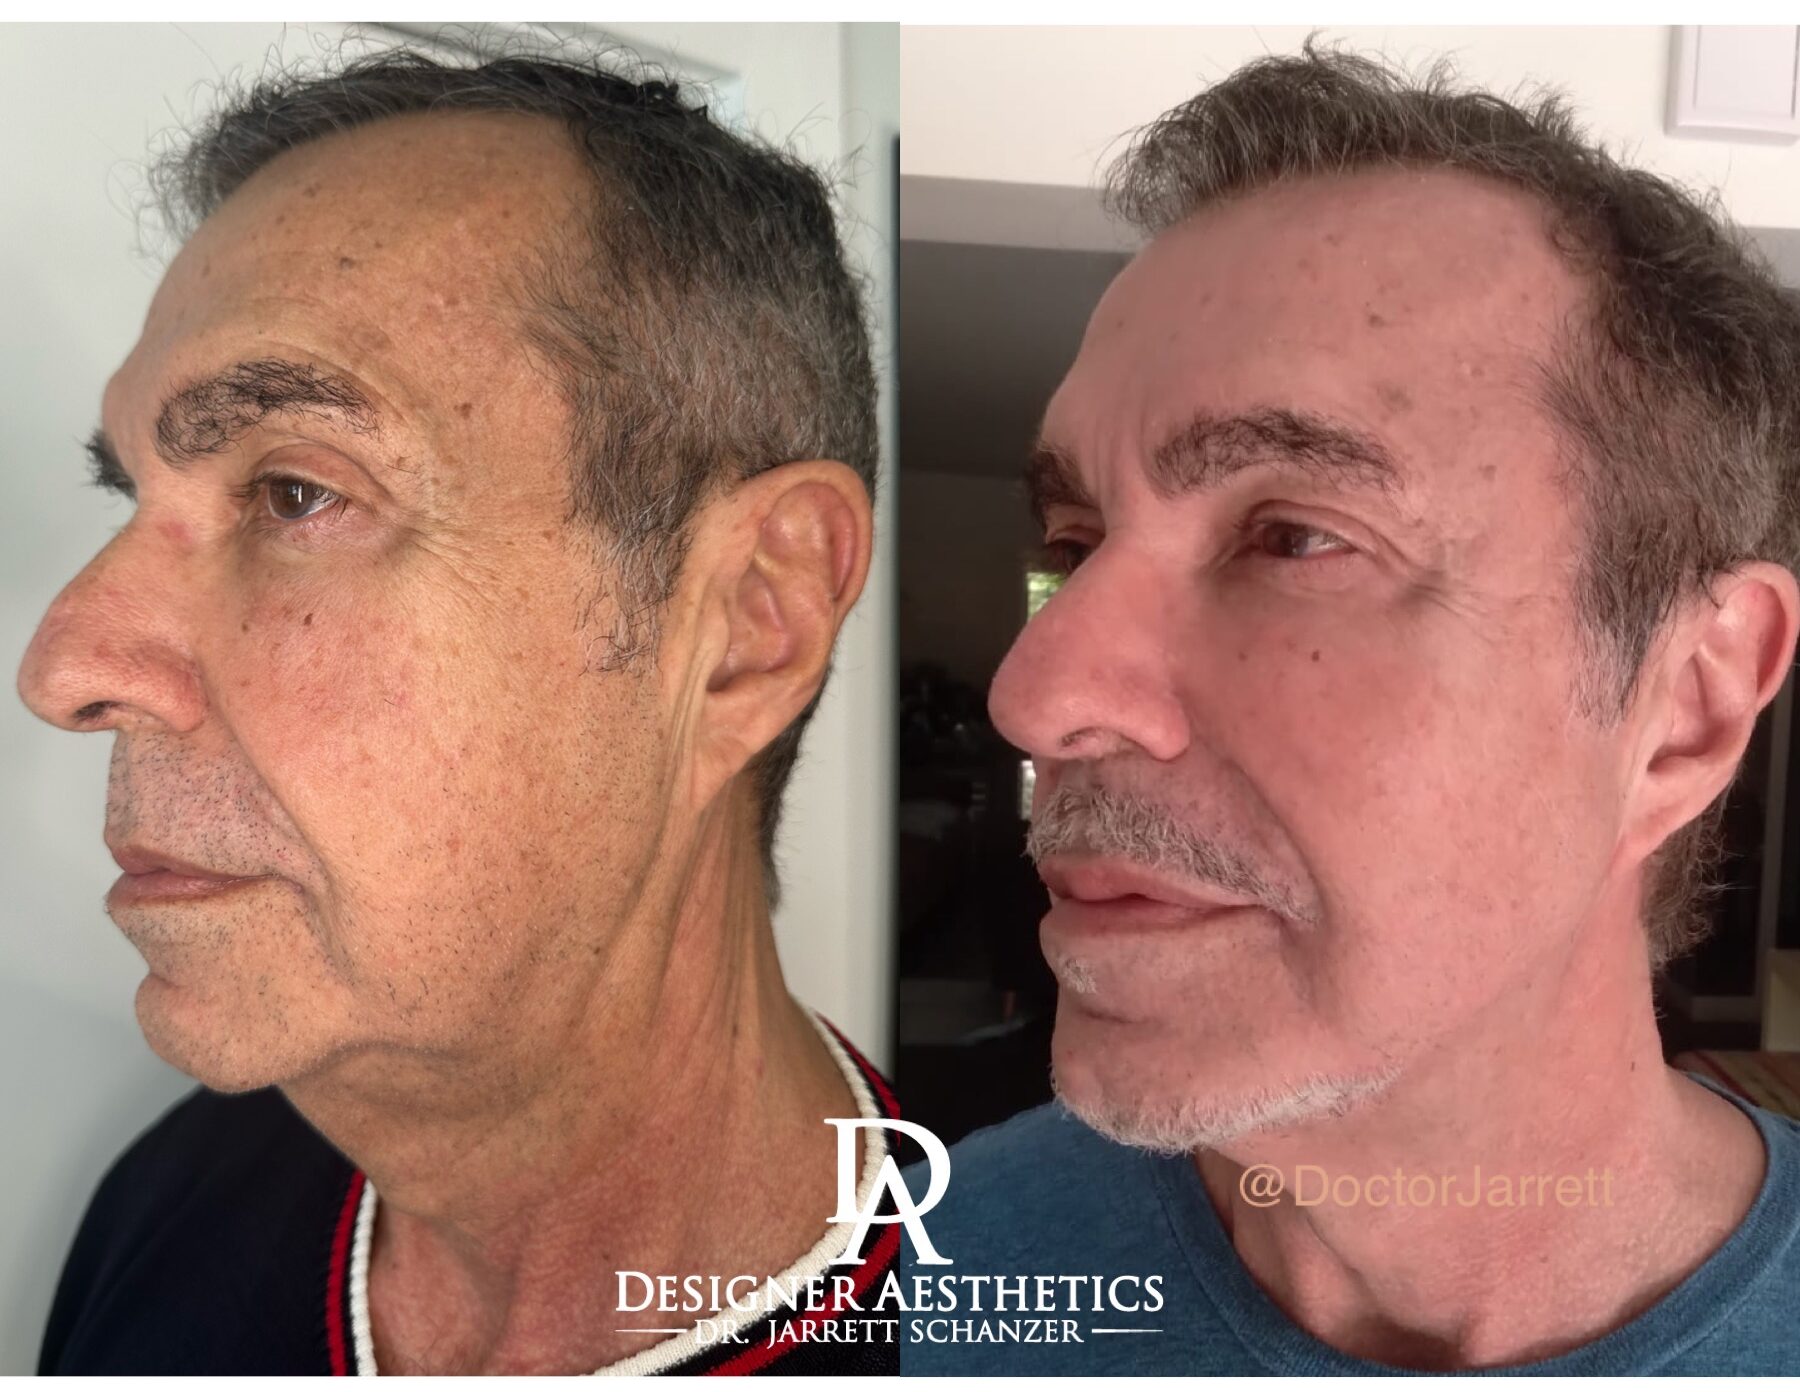 #pdo #thread #pdothreads #facelift #nonsurgical #transformation #beauty #antiaging #aesthetics #miami #newyork #miami injector #medspa #americatop100injector #newyorkinjector #perfection #beauty #injections #fillers #injectables #doctor